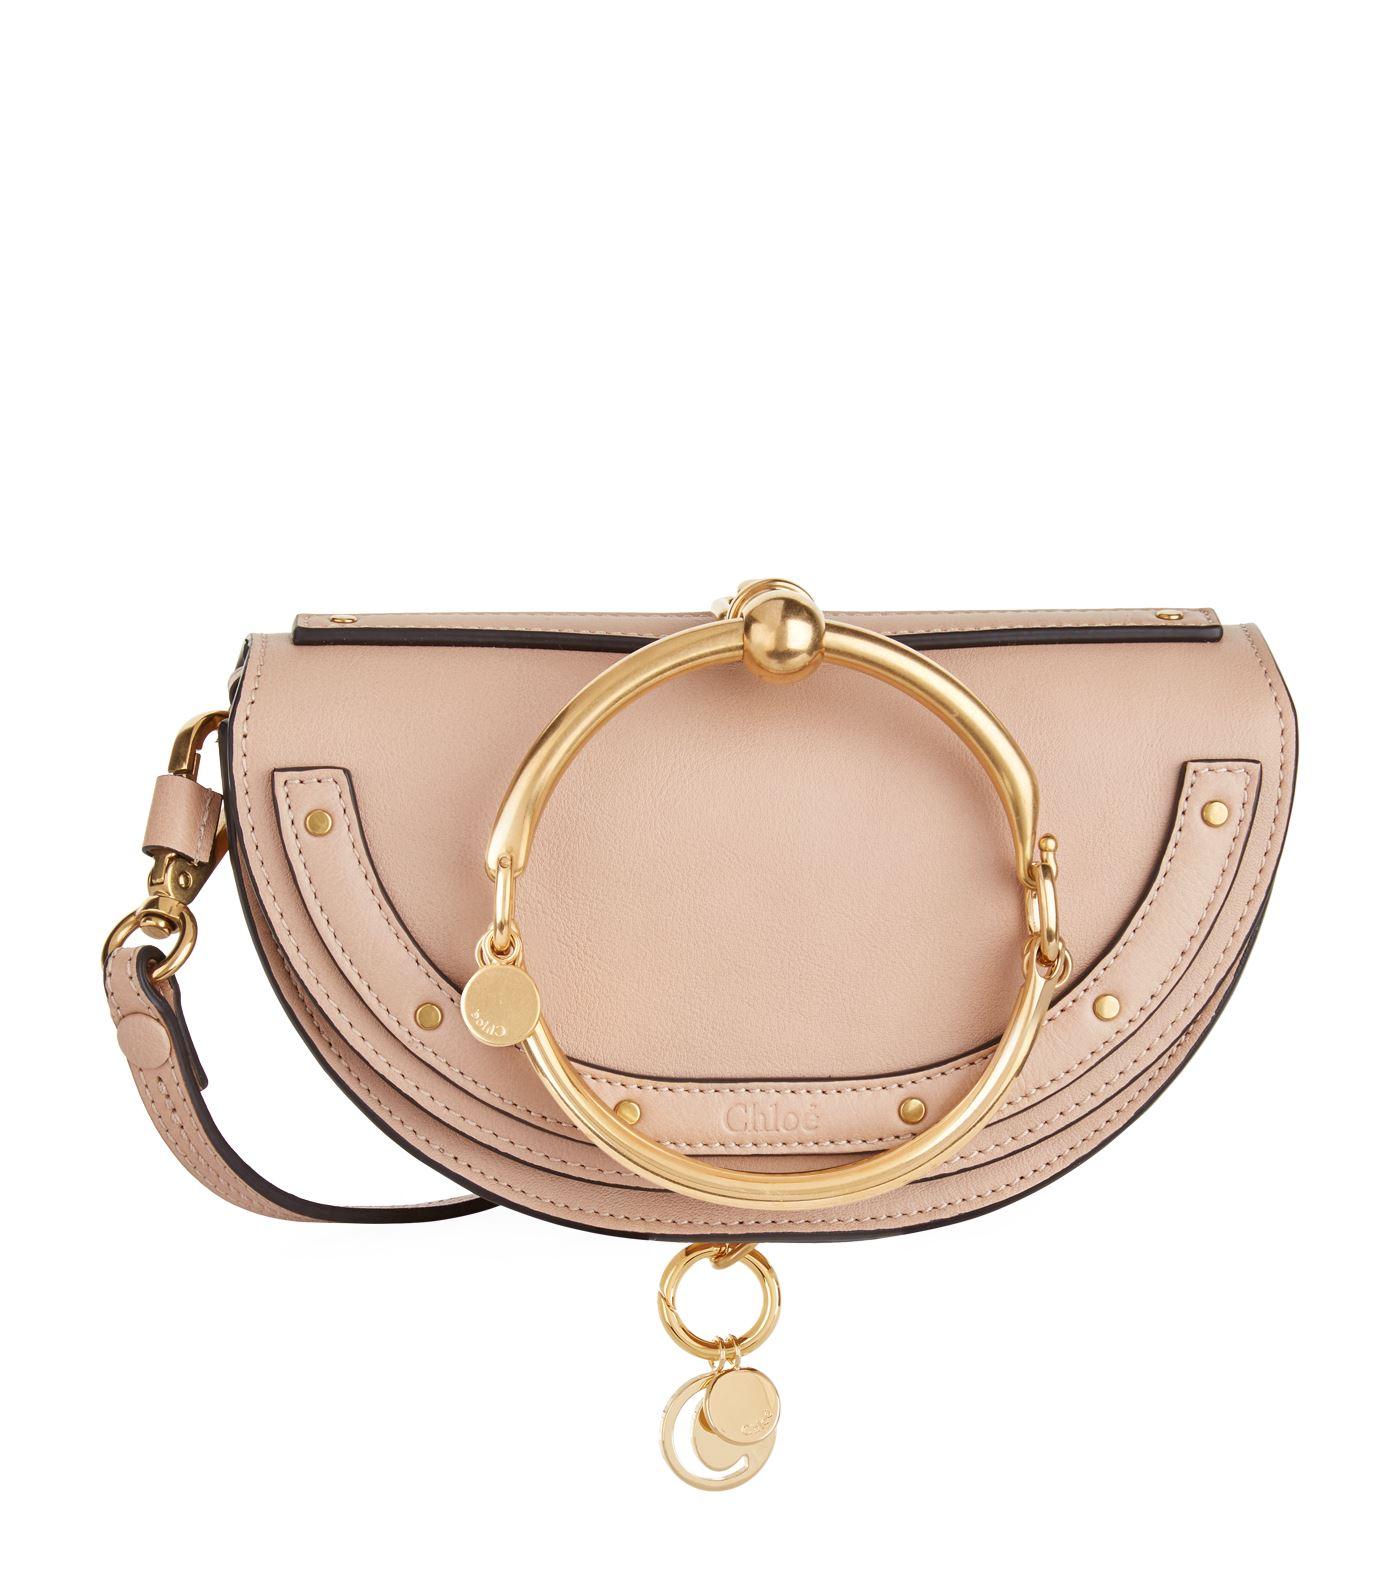 Chloé Small Nile Half-moon Bag in Natural | Lyst